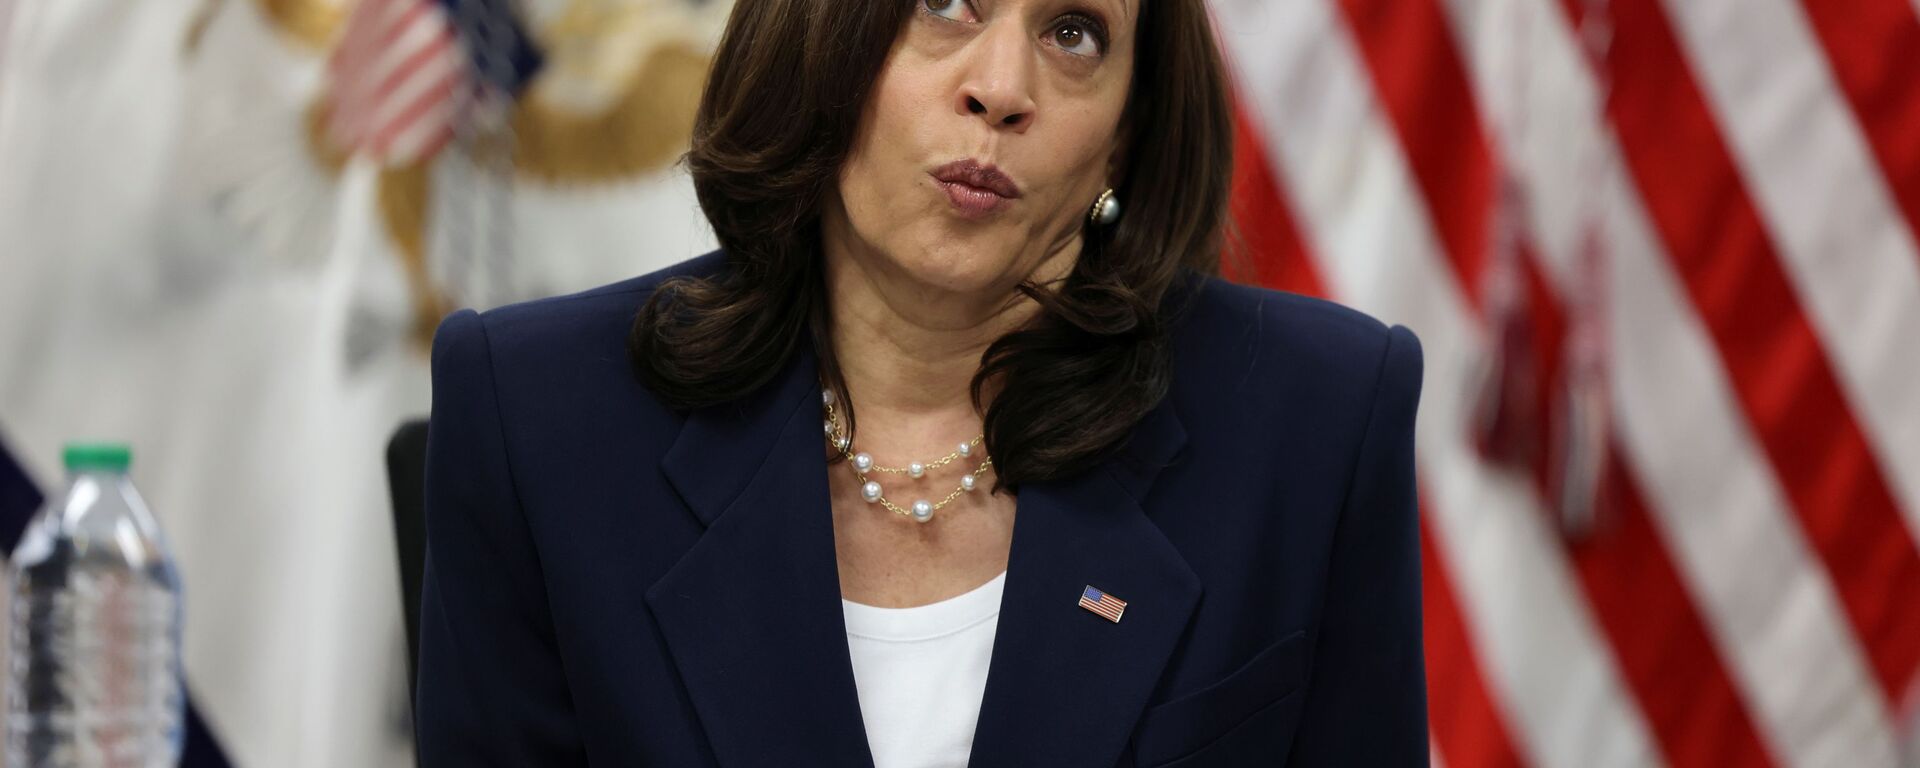 U.S. Vice President Kamala Harris takes part in a round table with faith and community leaders who are assisting with the processing of migrants seeking asylum, at Paso del Norte Port of Entry in El Paso, Texas, U.S., June 25, 2021 - Sputnik International, 1920, 13.01.2022